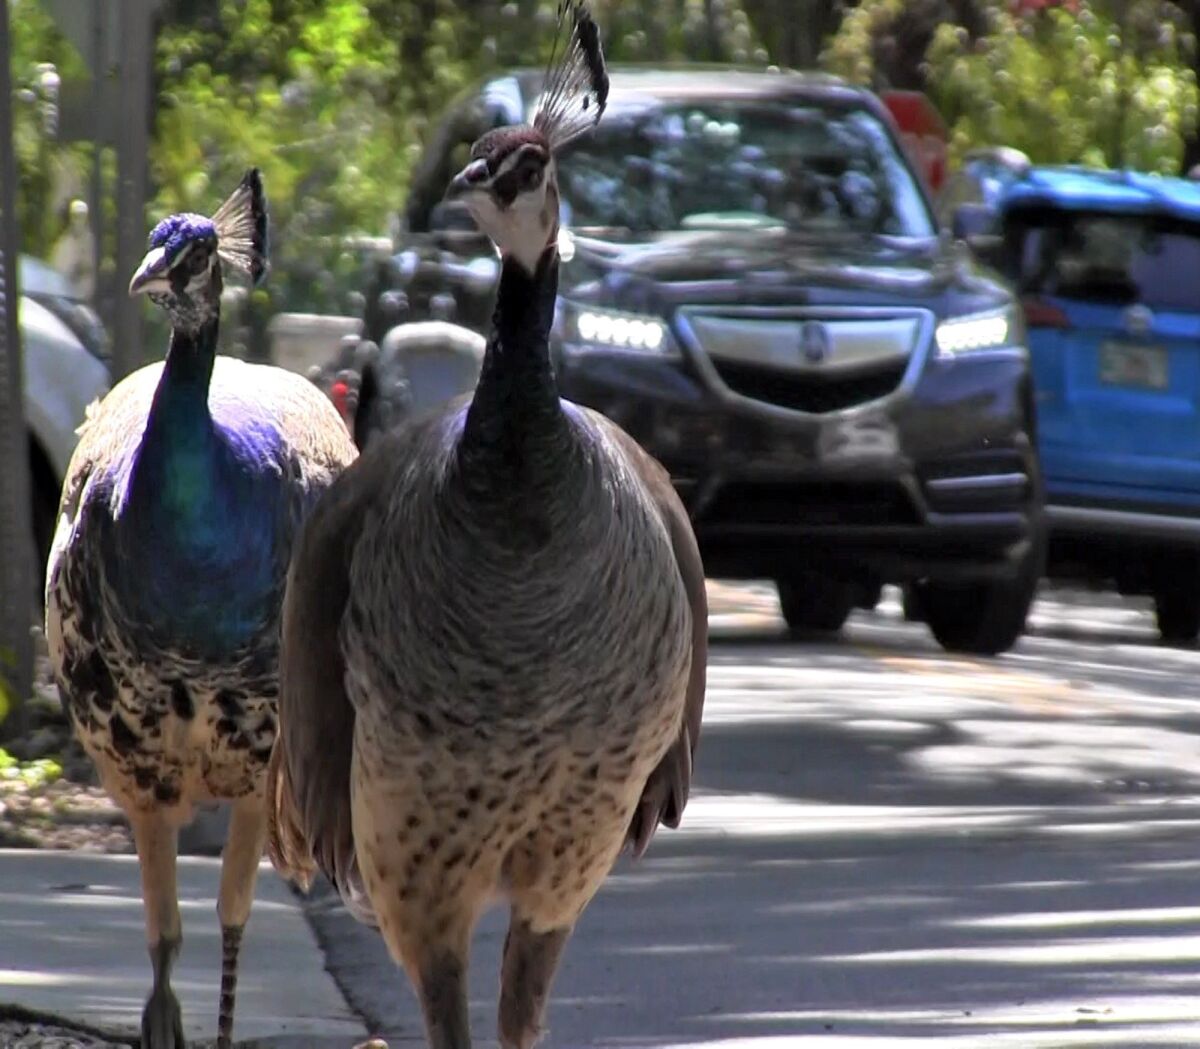 FILE - In this April 27, 2017 photo, a pack of peacocks mill about at an intersection in the Coconut Grove neighborhood of Miami. Peacocks could soon be on the outs in some Miami-Dade neighborhoods after the county commission agreed to loosen a law protecting the birds. The 20-year-old law still protects peacocks from harm, but commissioners agreed Tuesday, Feb. 1, 2022, to allow cities to opt out of the rules if they present appropriate plans to humanely remove the divisive birds from areas where they're not wanted. (Al Diaz/Miami Herald via AP, File)